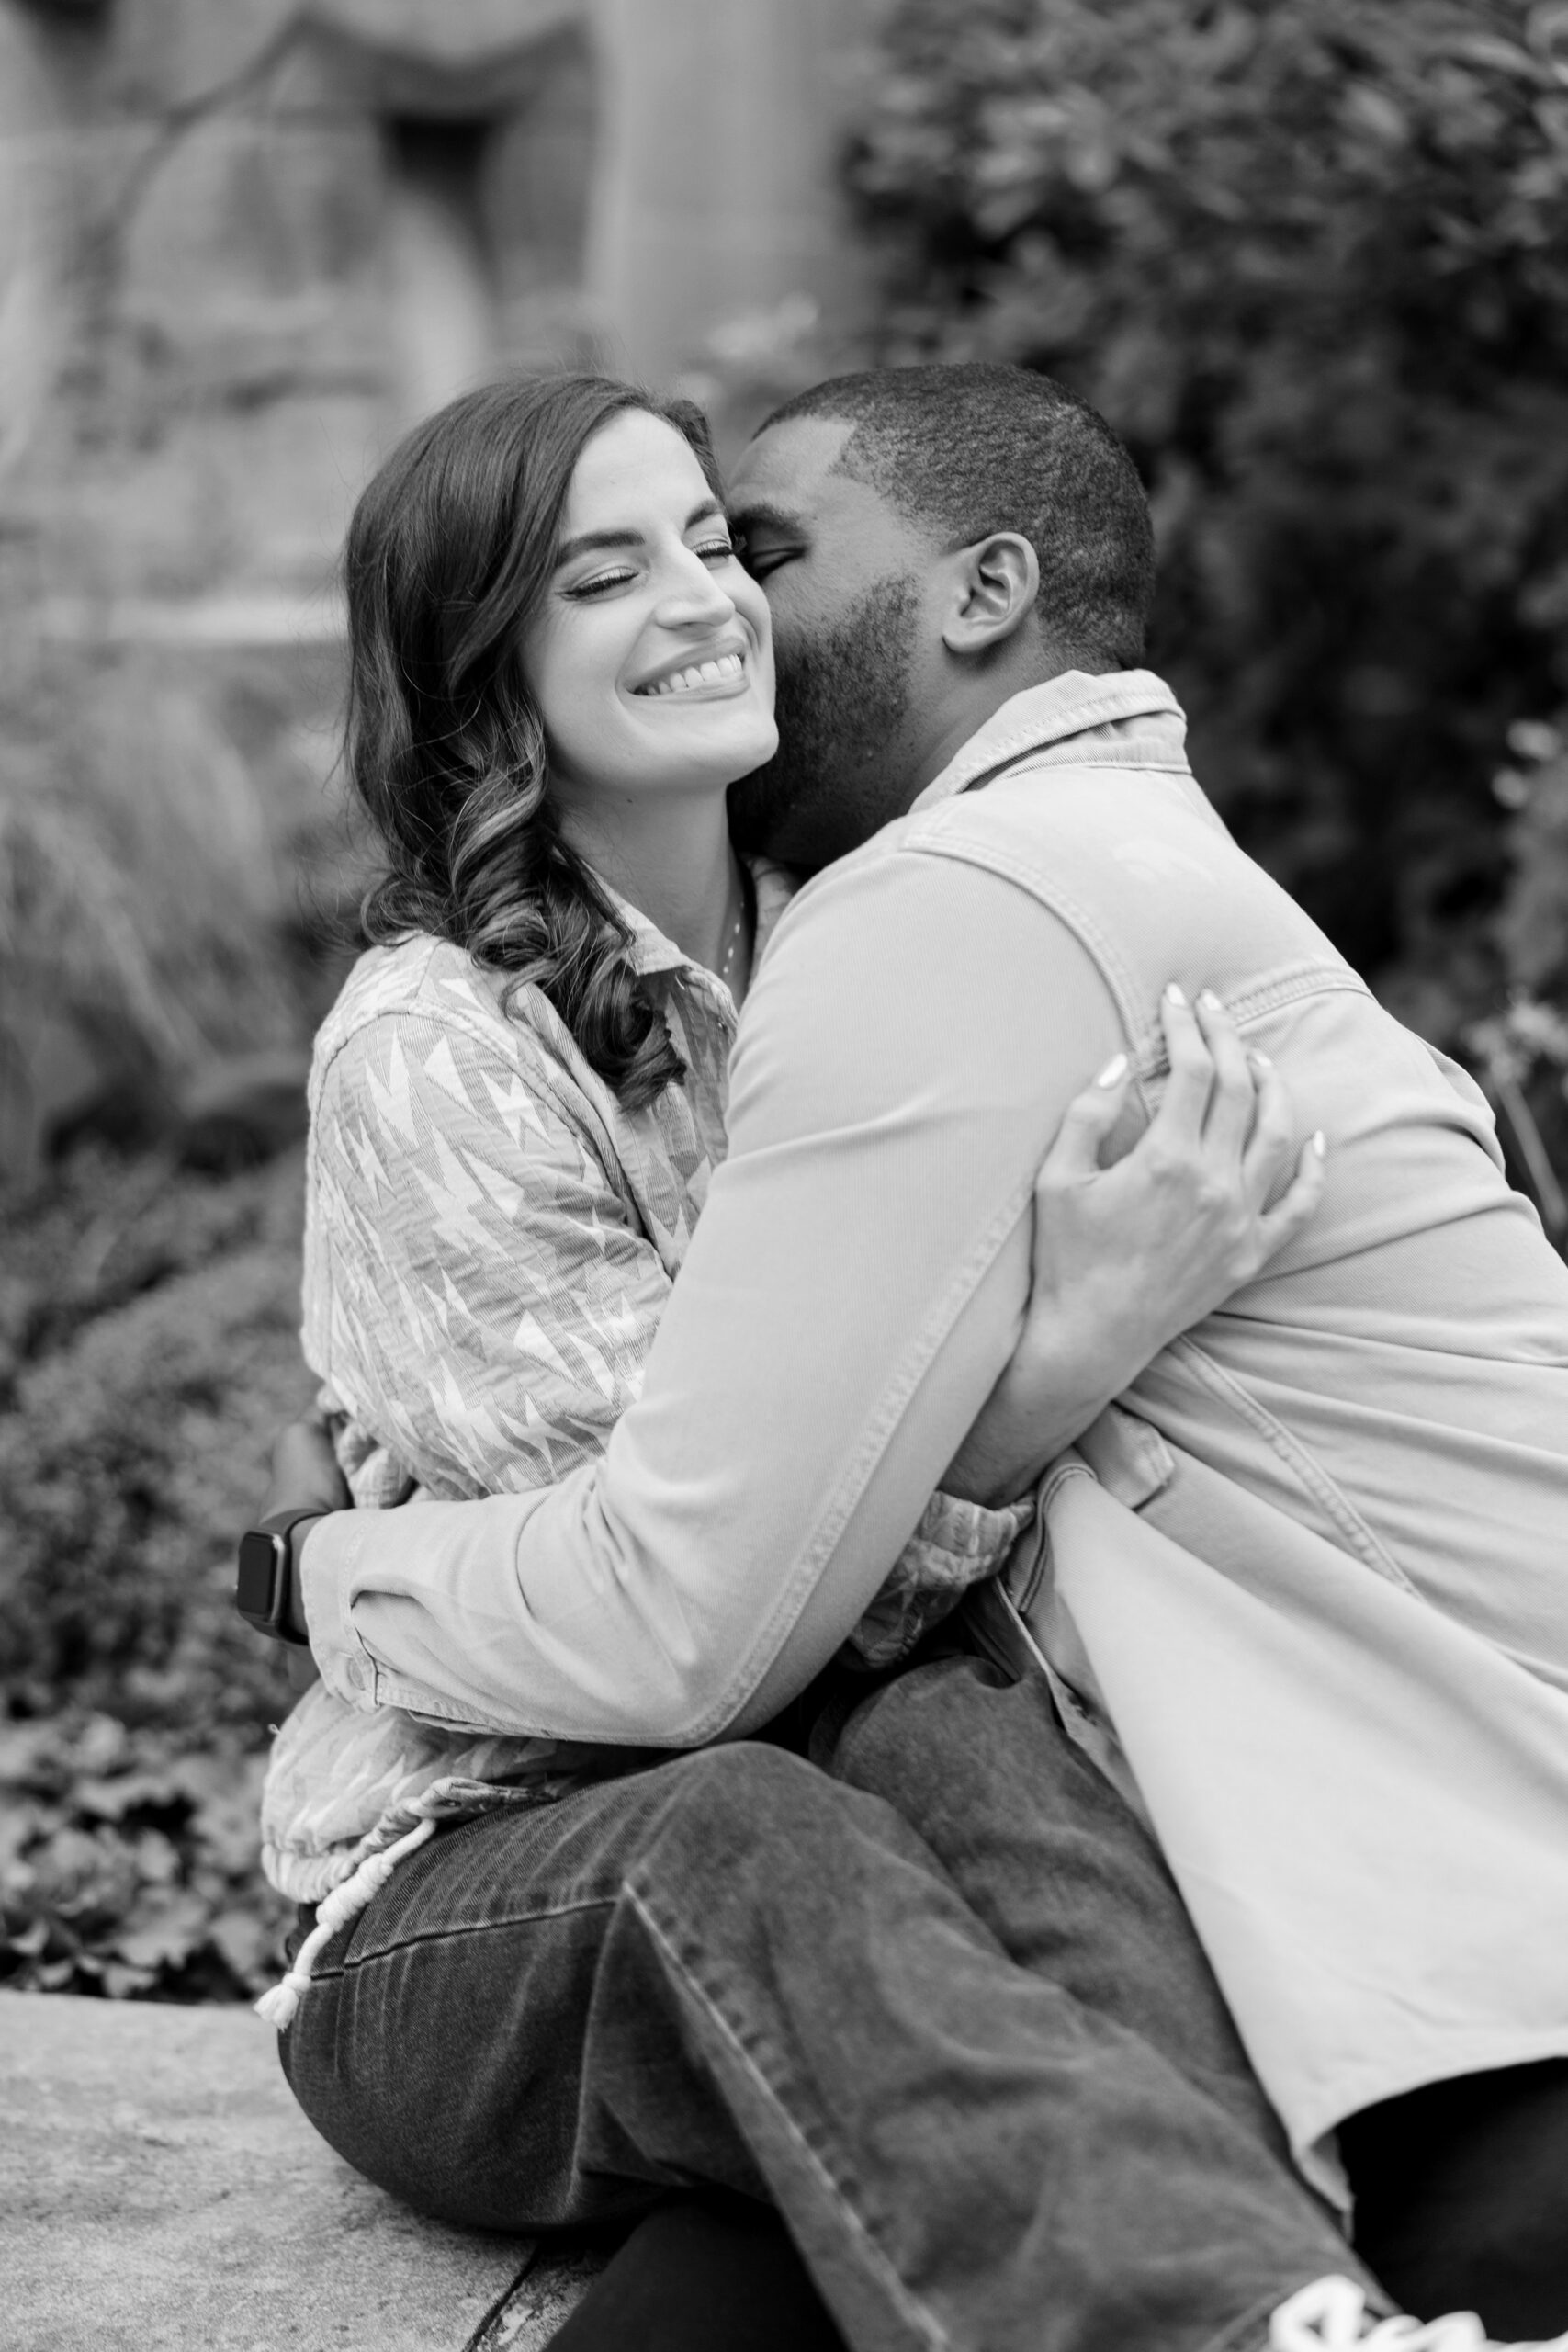 Man kisses woman playfully during chicago engagement photos